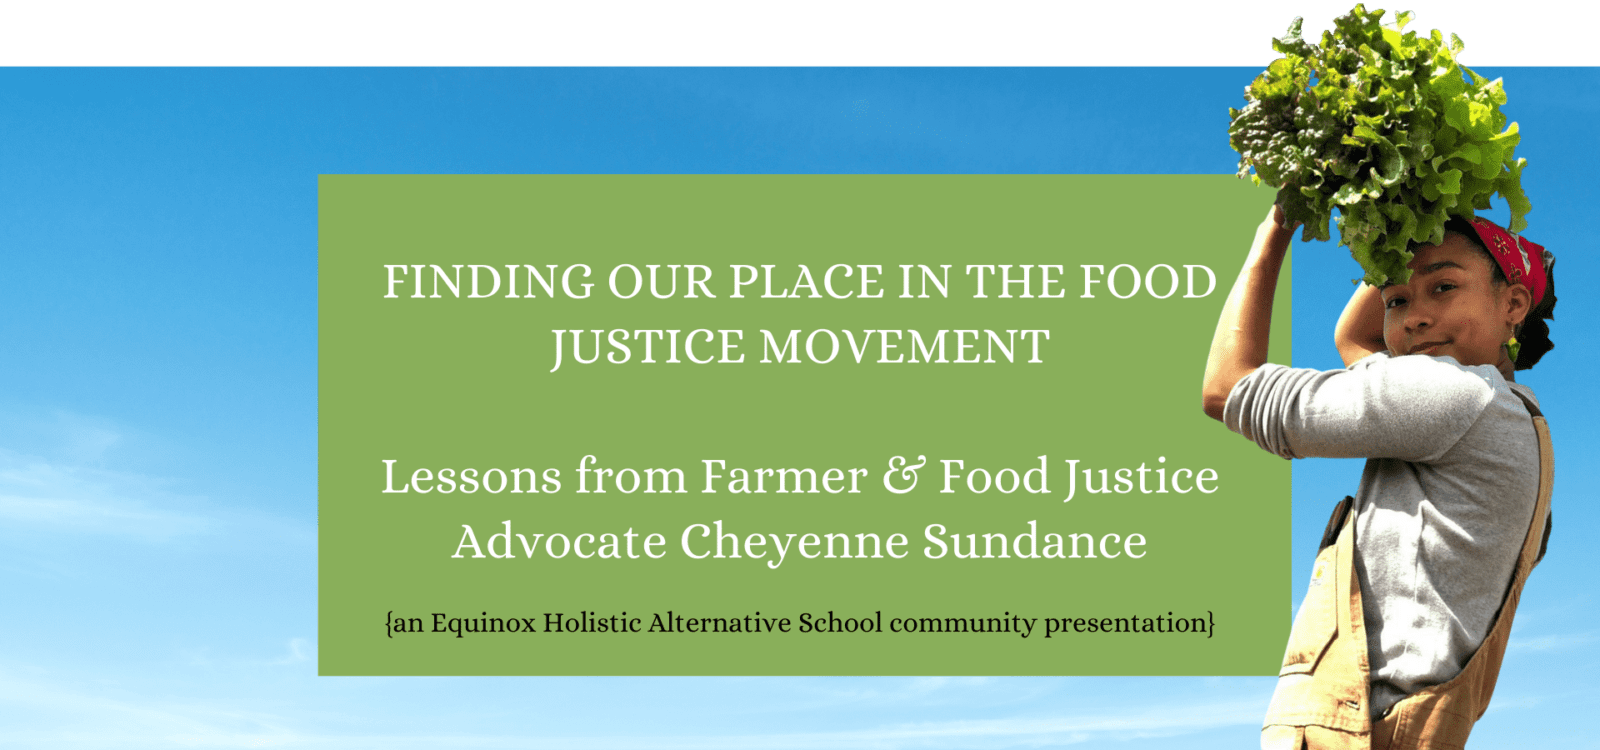 Finding our place in the food justice movement: Lessons from farmer and food justice advocate Cheyenne Sundance. An Equinox Holistic Alternative School Community presentation